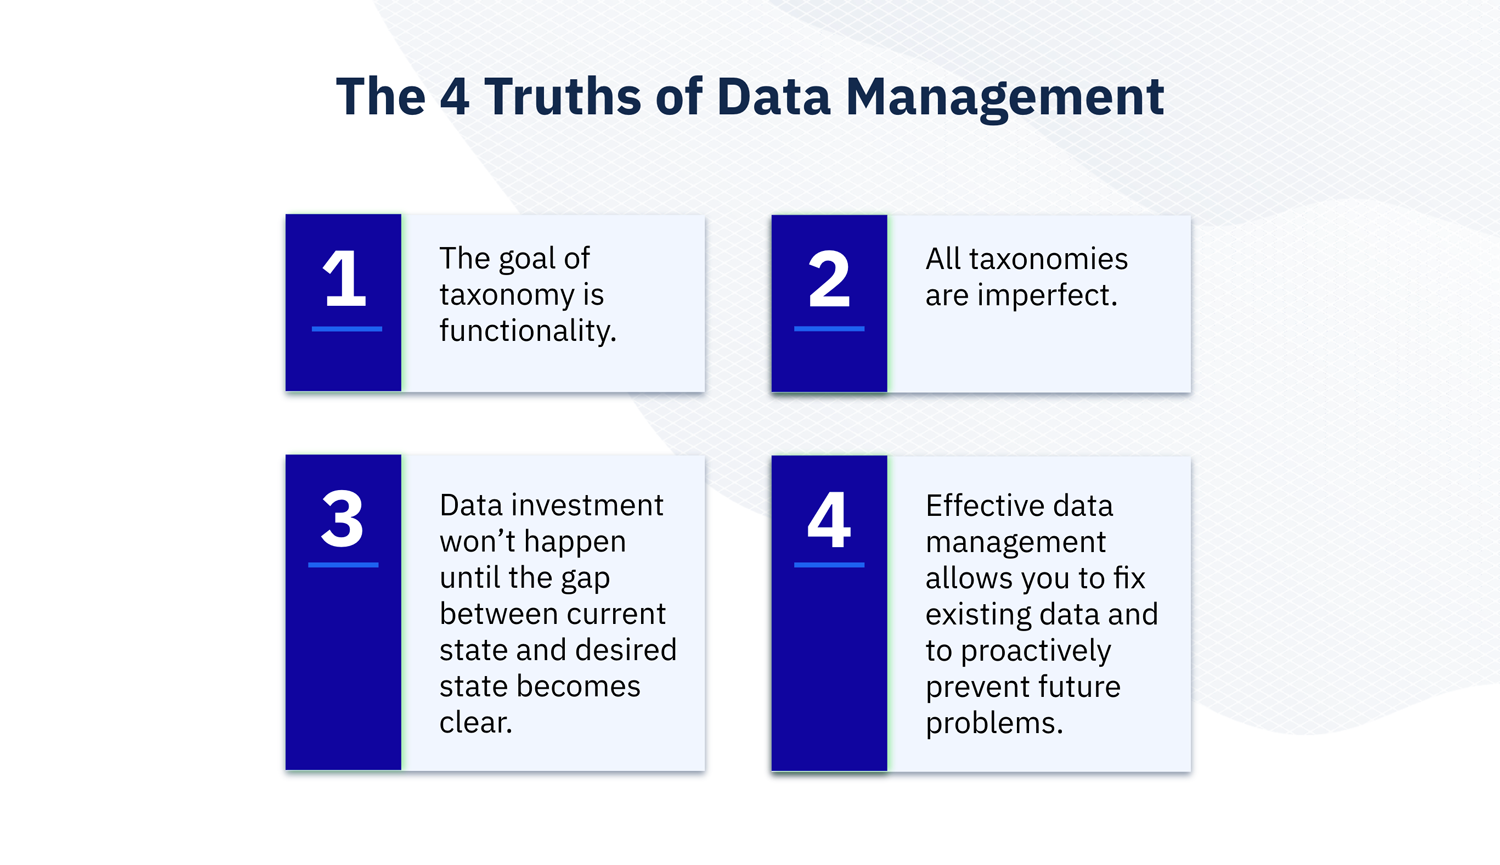 The 4 Truths of Data Management